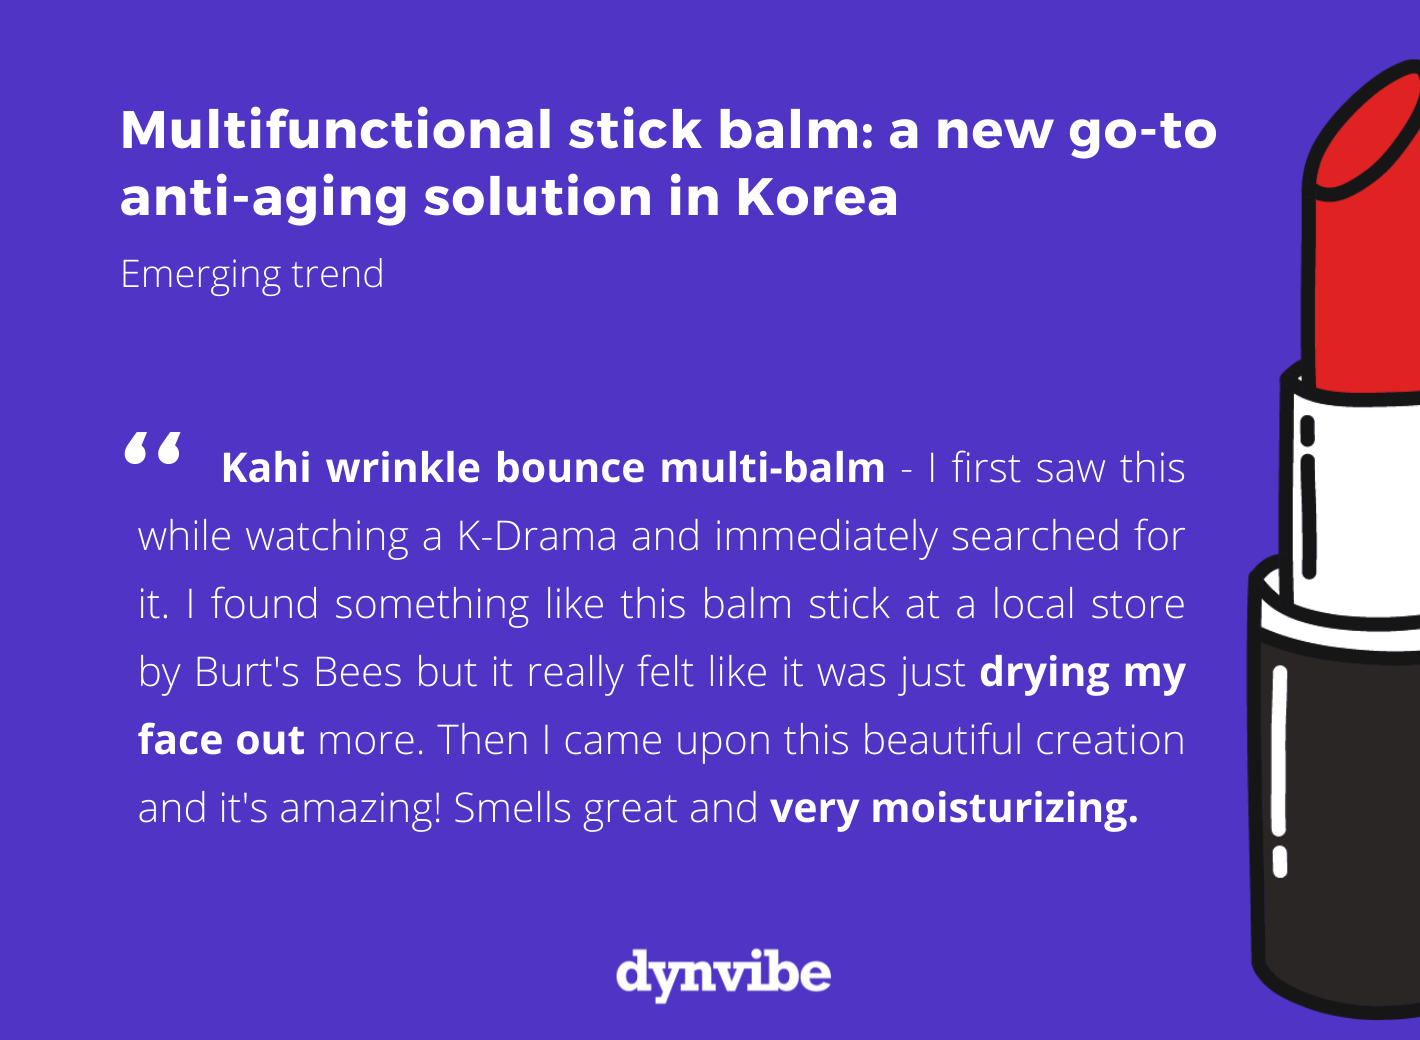 Multifunctional stick balm : a new go-to anti-aging solution in Korea